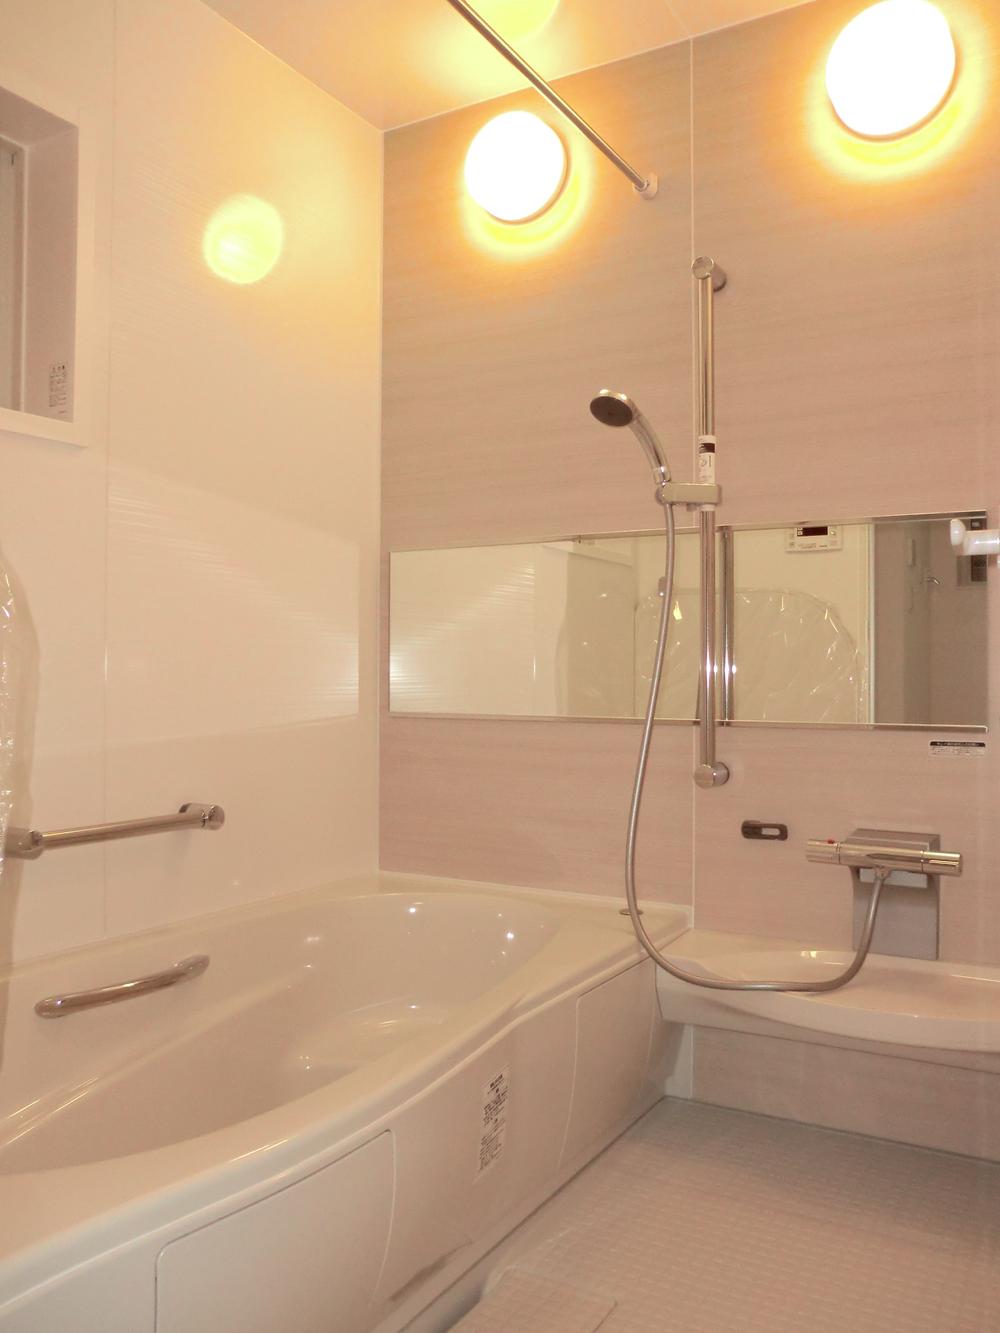 Same specifications photo (bathroom). Same specifications photo (bathroom) with bathroom dryer, The bathrooms are clean and easy Kururin poi drainage port! 1616 spacious bathtub size, Hard to feel the cold floor = is thermo floor.